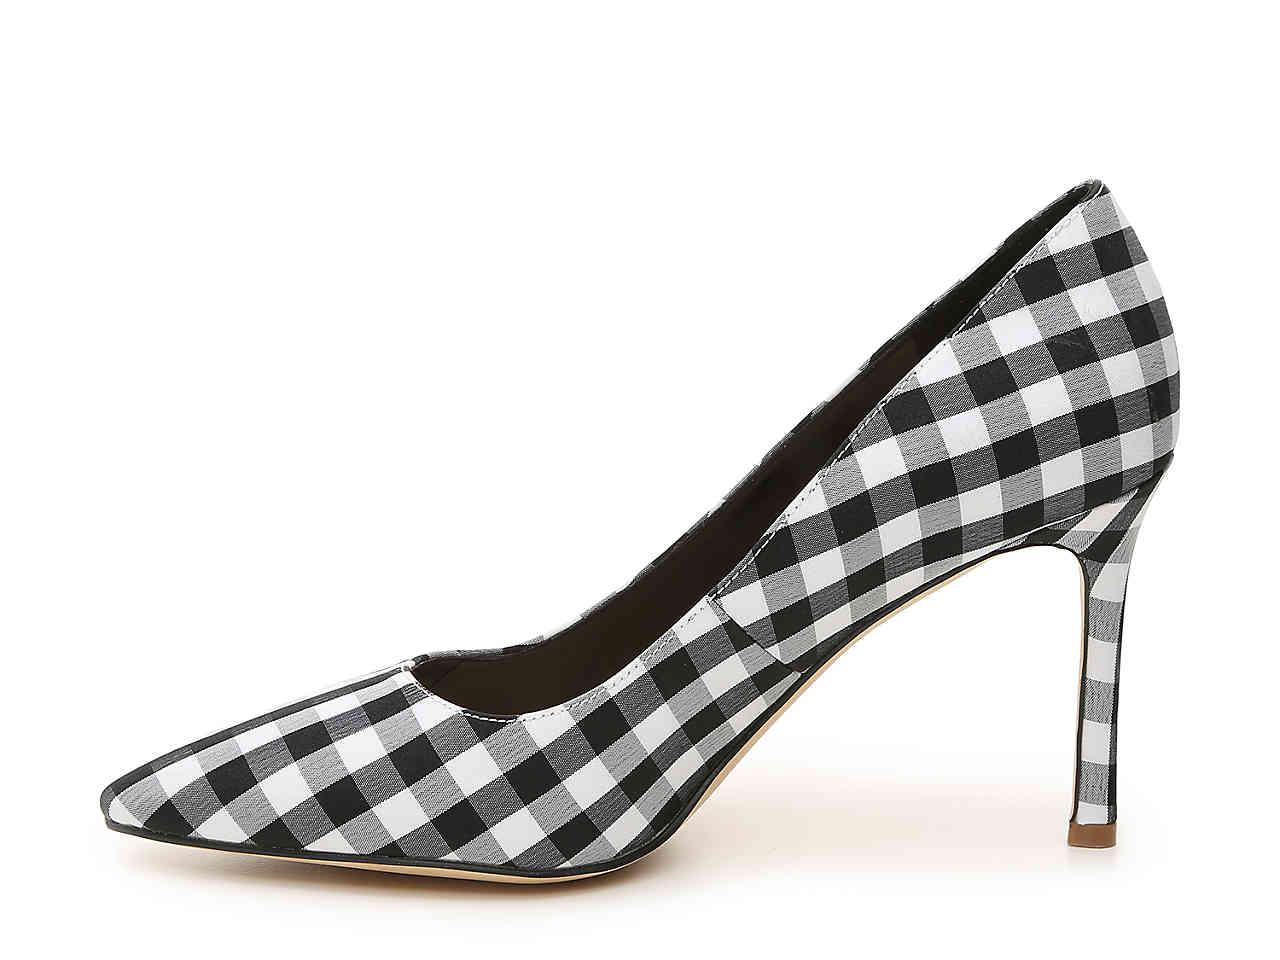 Nine West Extension Pump in Black/White Checkered Gingham (Black) - Lyst